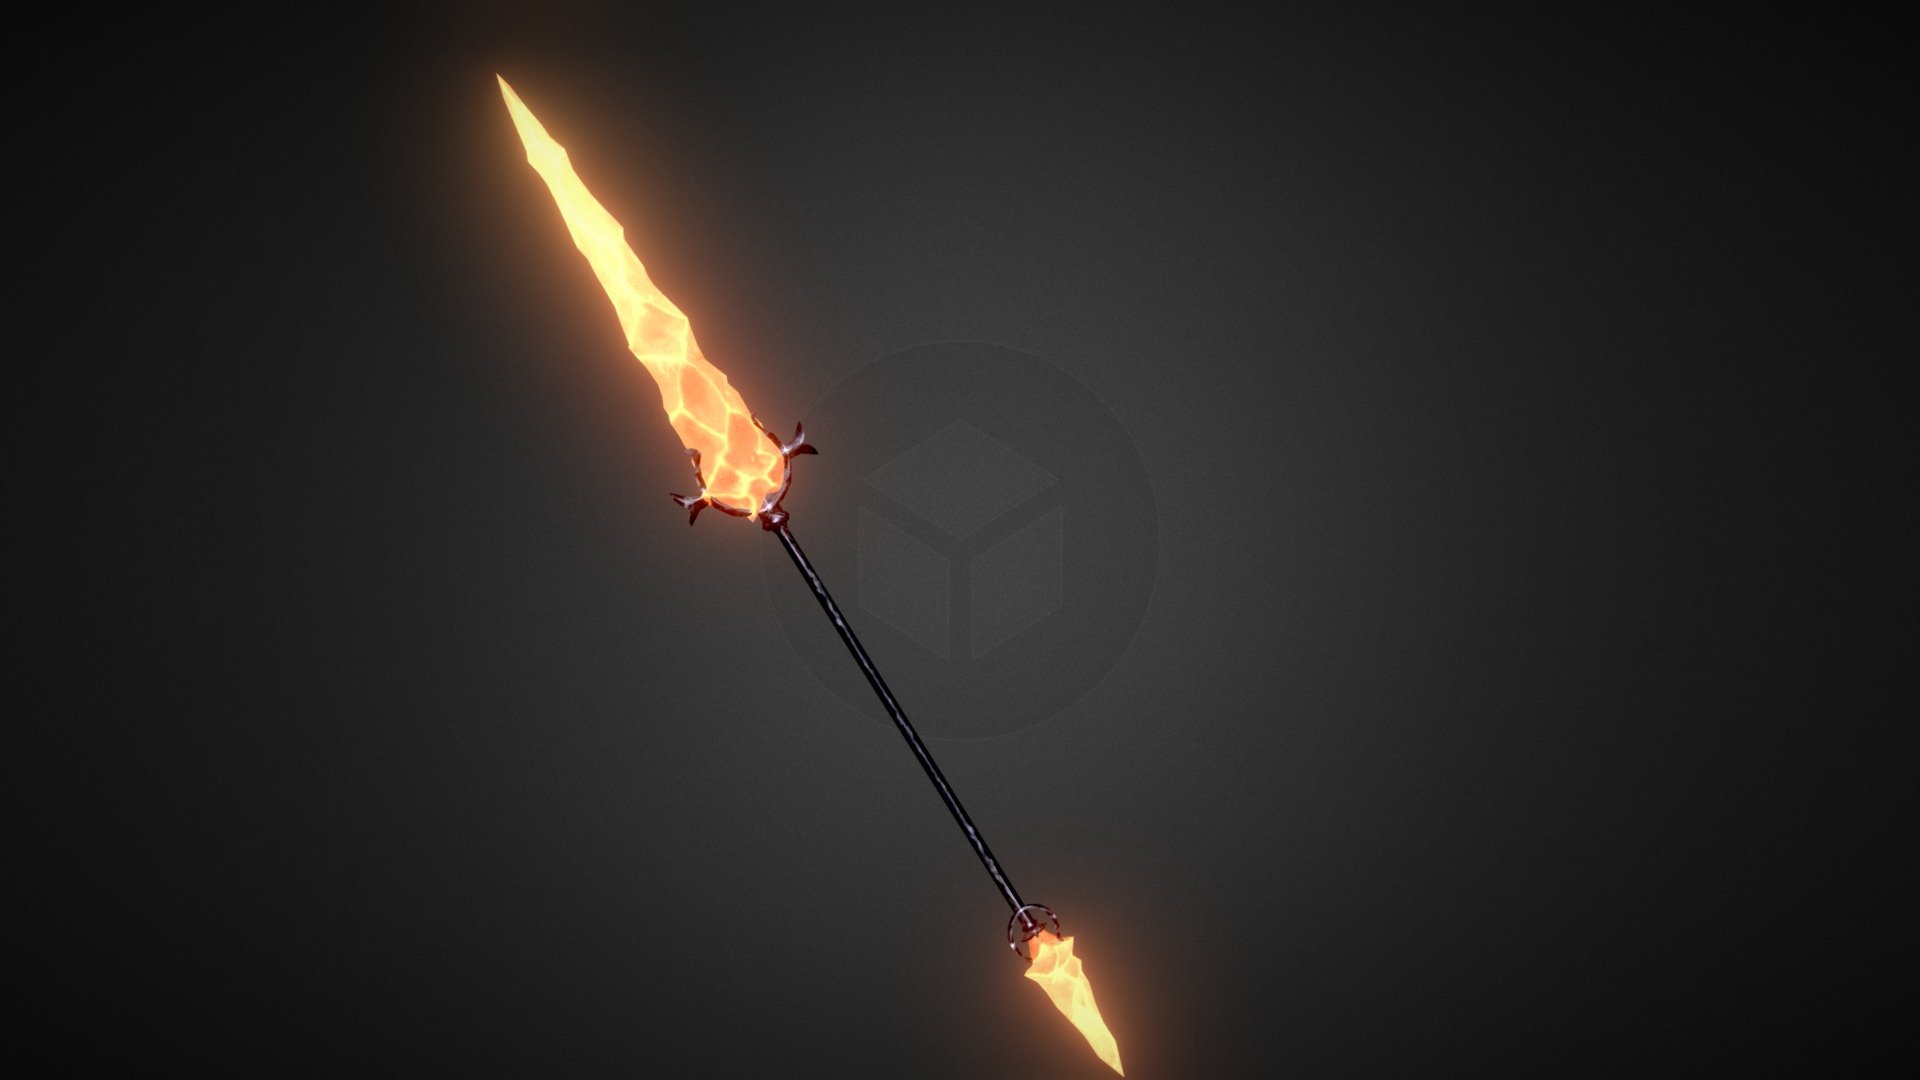 Hell Spear
Low poly Crystalized Fire spear Spear.
Used only 1 texture.
Originally created for a valheim mod 3d model